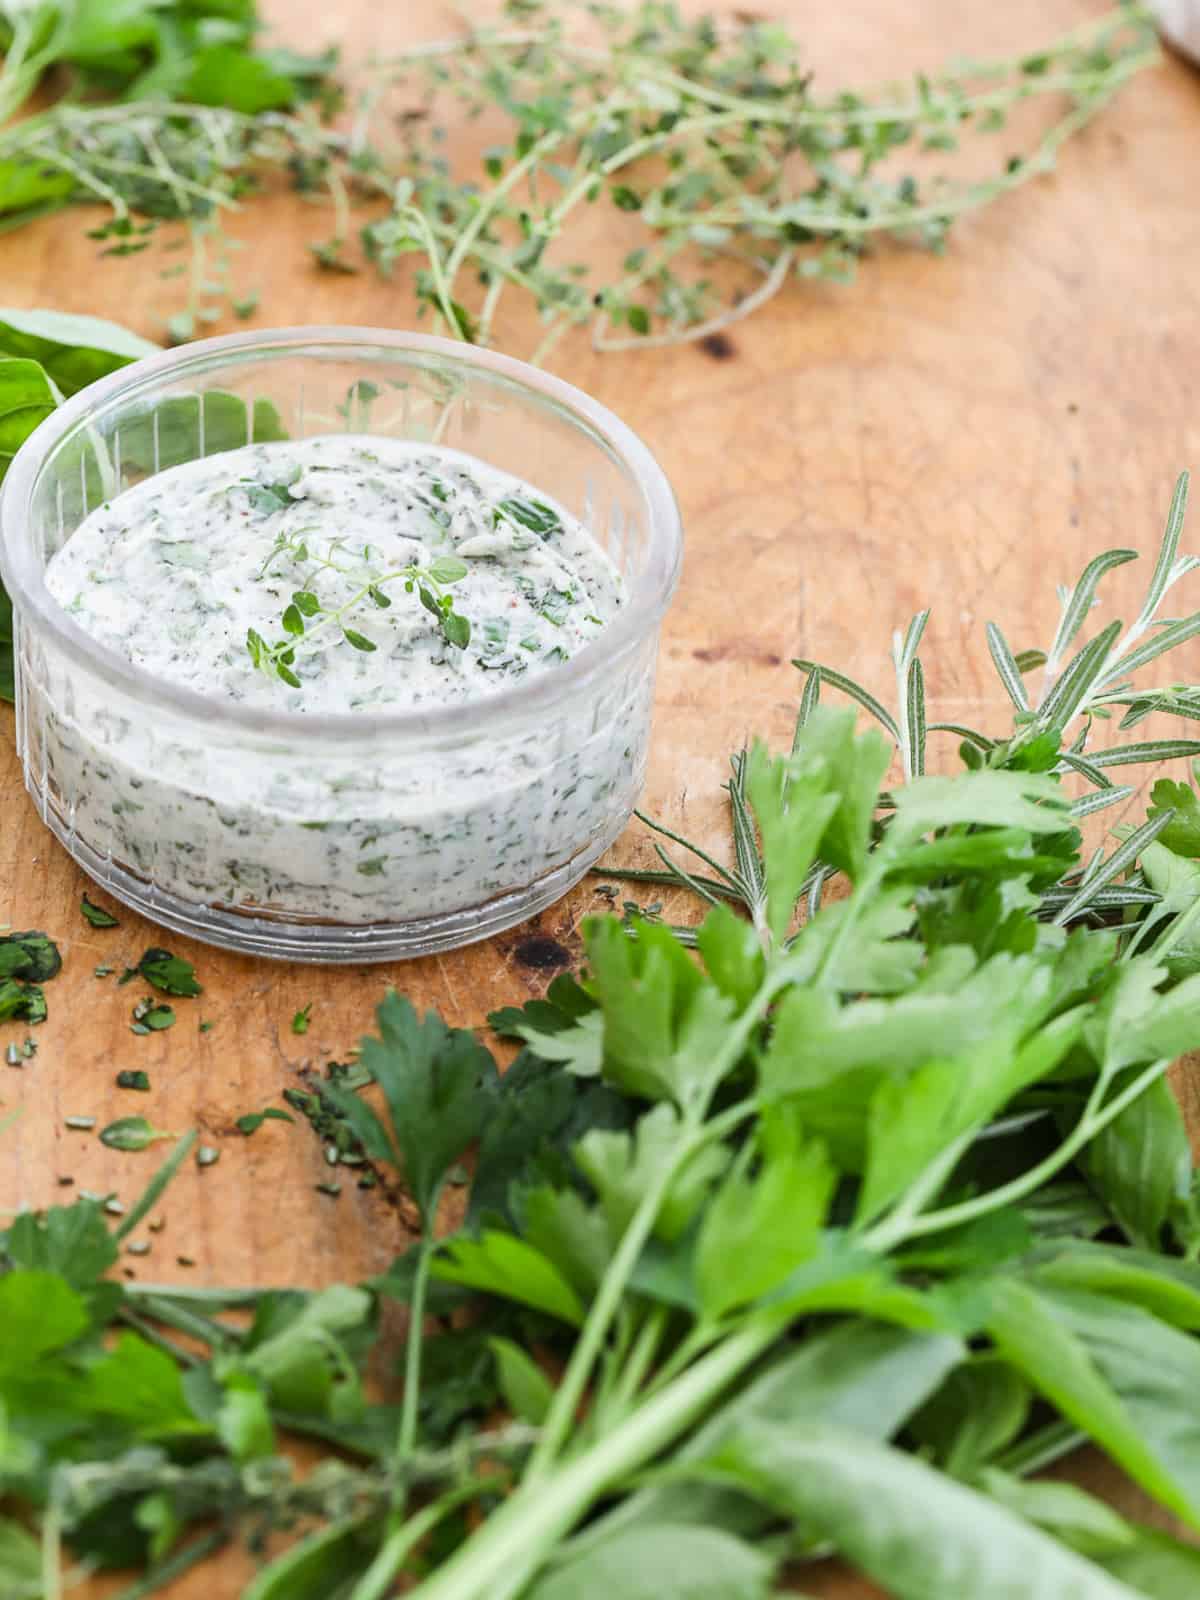 https://www.delicioustable.com/wp-content/uploads/2023/05/Herb-butter-in-small-round-glass-bowl.jpg